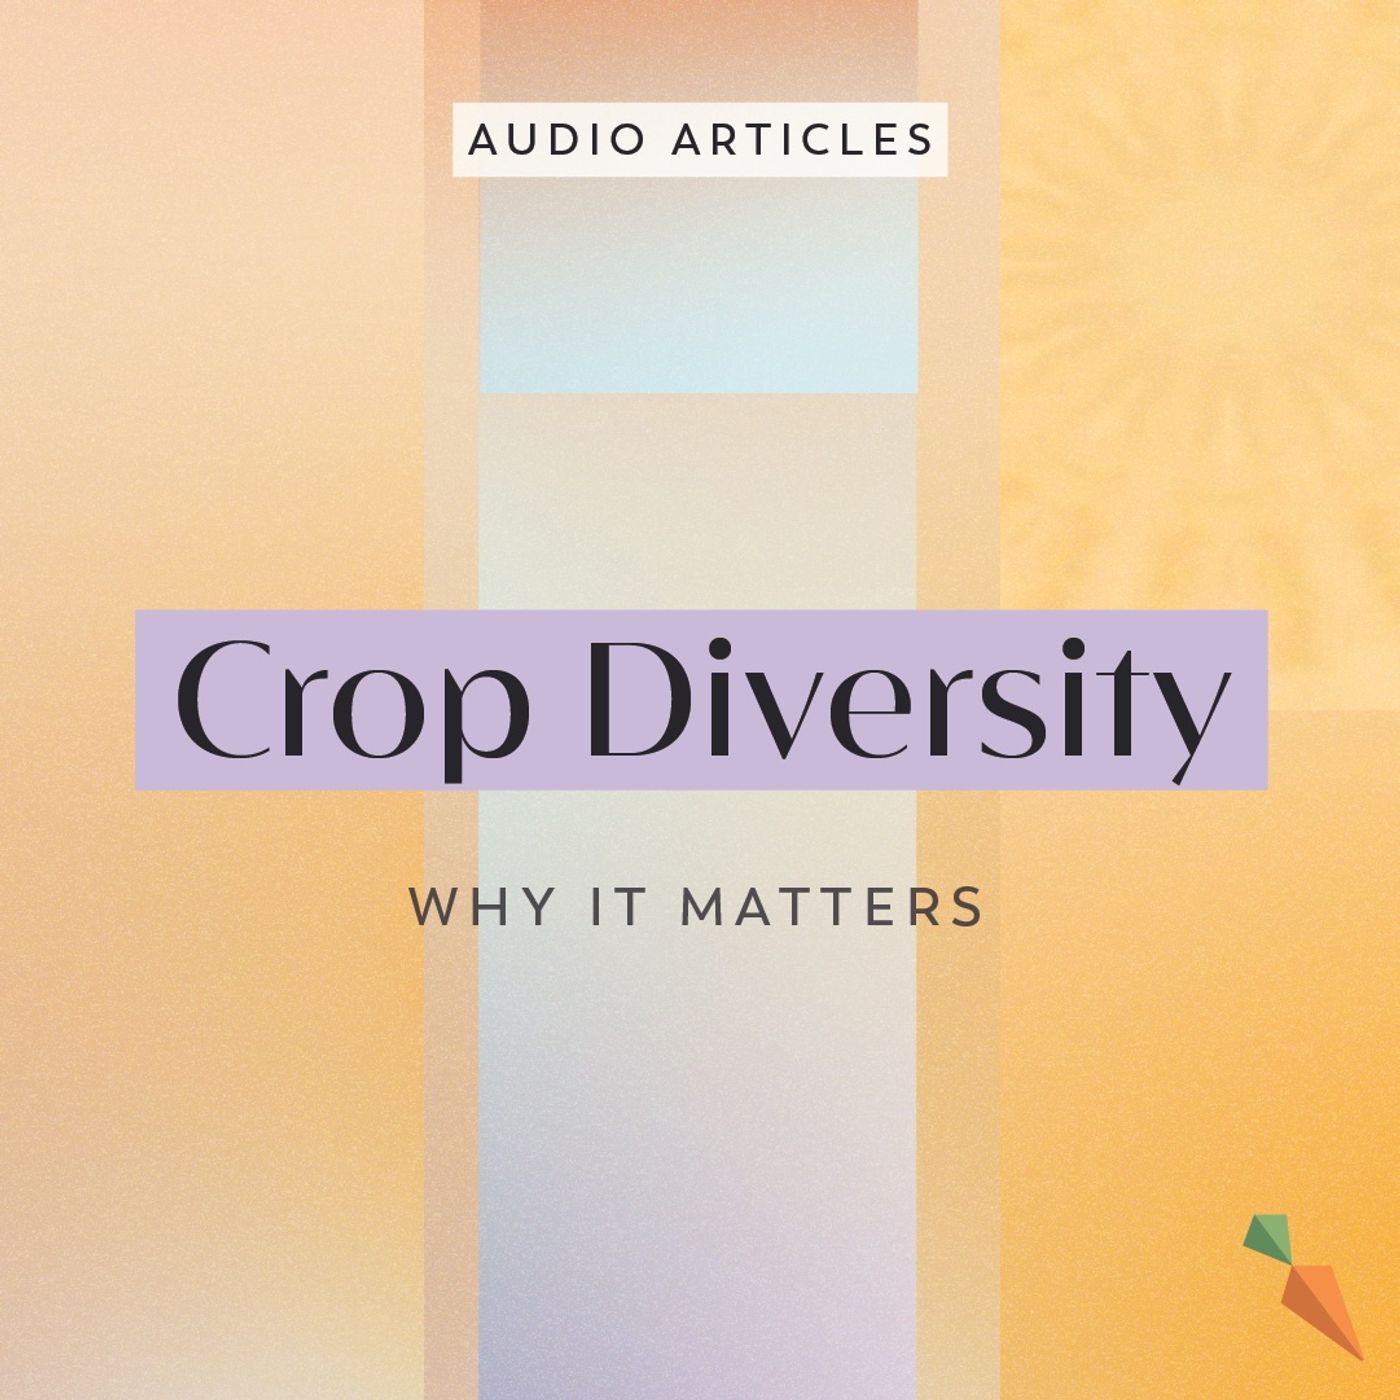 Crop Diversity: Why It Matters | FoodUnfolded AudioArticle